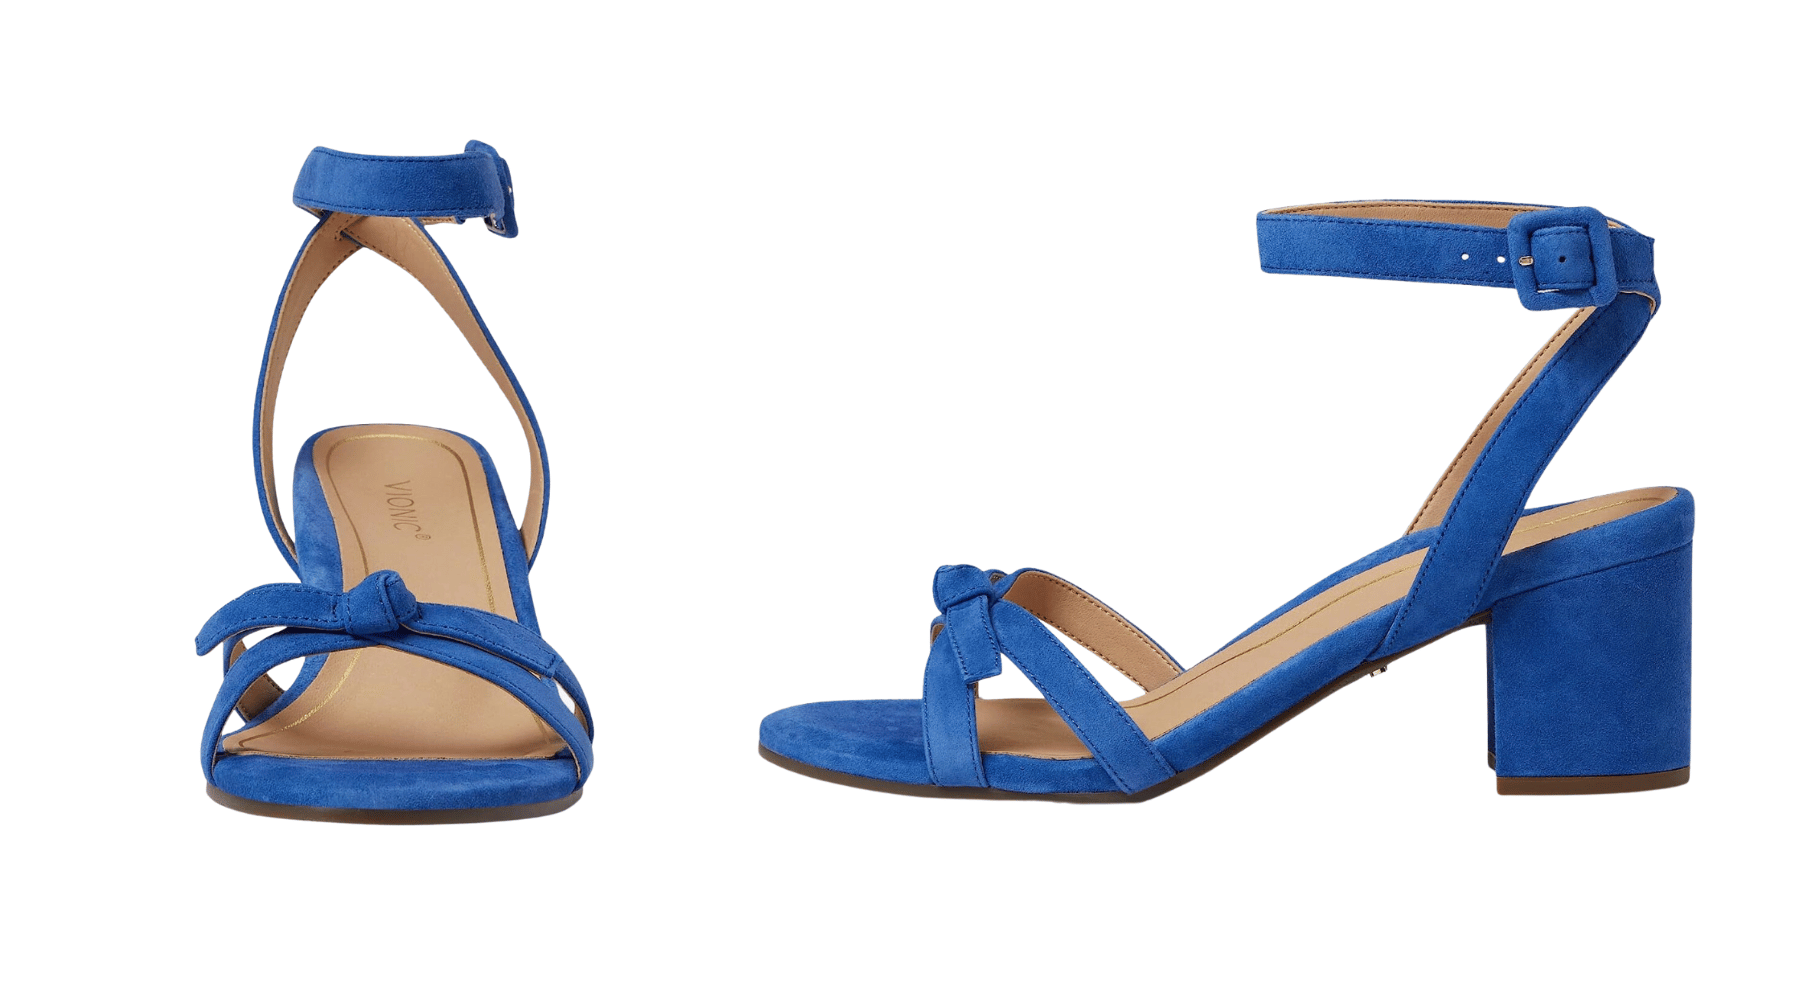 Comfortable blue suede heels with ankle straps by Vionic